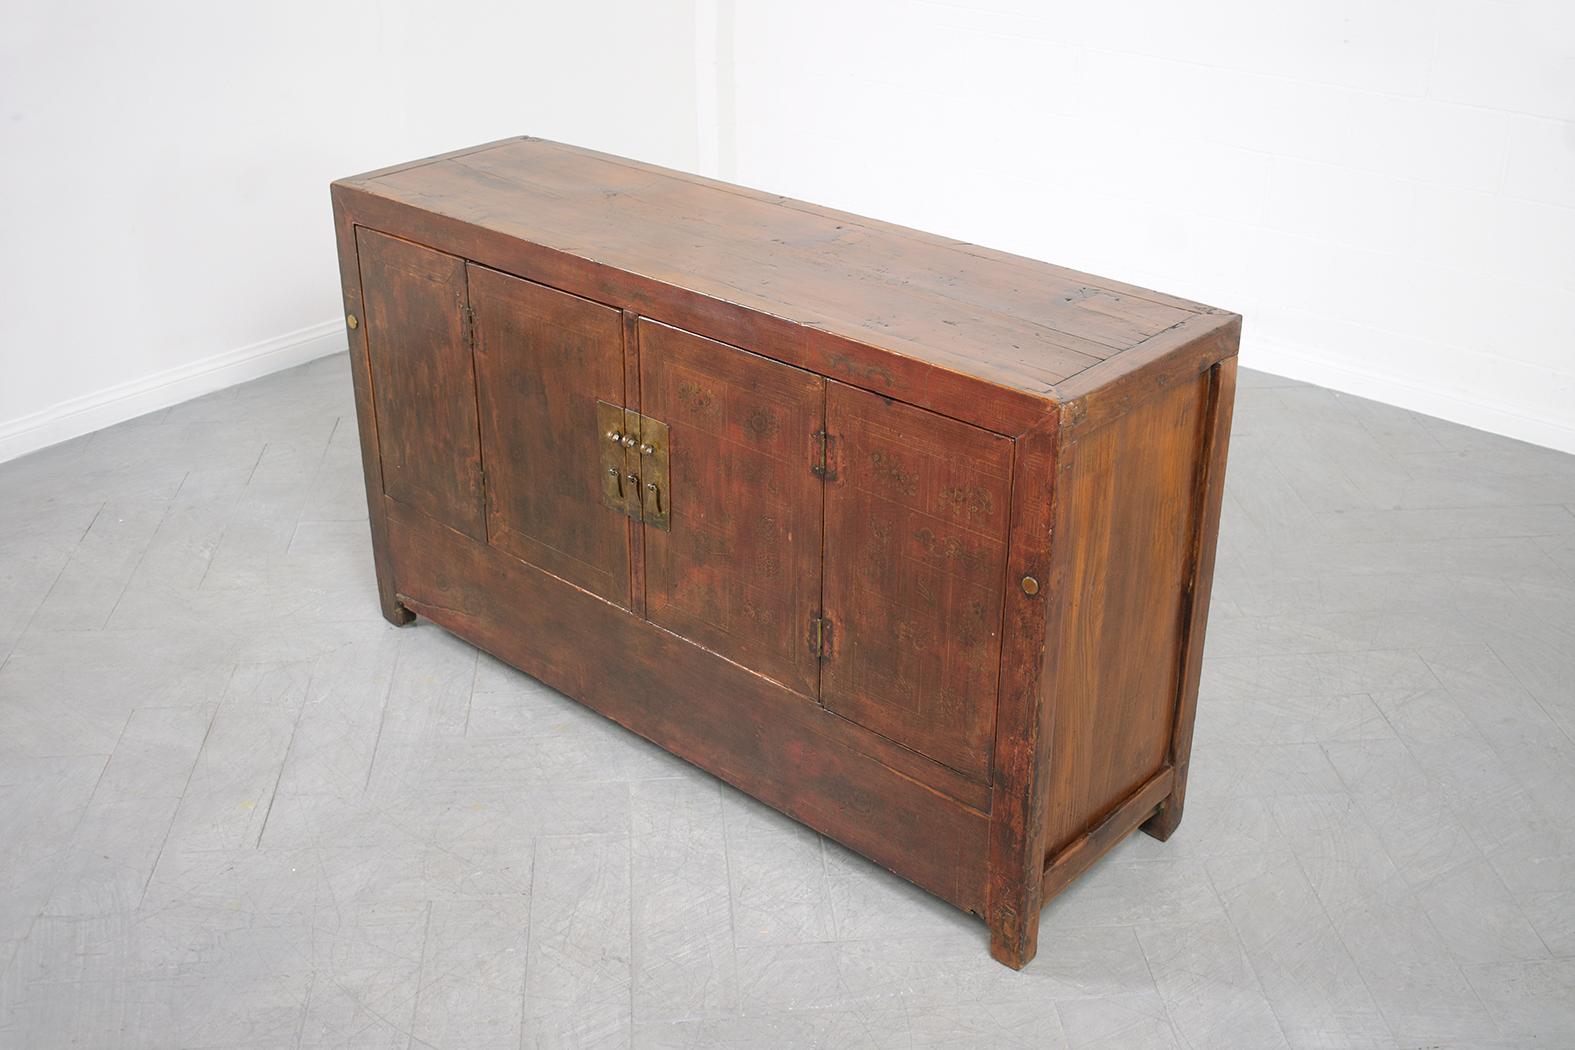 1980s Vintage Chinese Elm Wood Sideboard: Hand-Painted Floral & Brass Accents For Sale 5